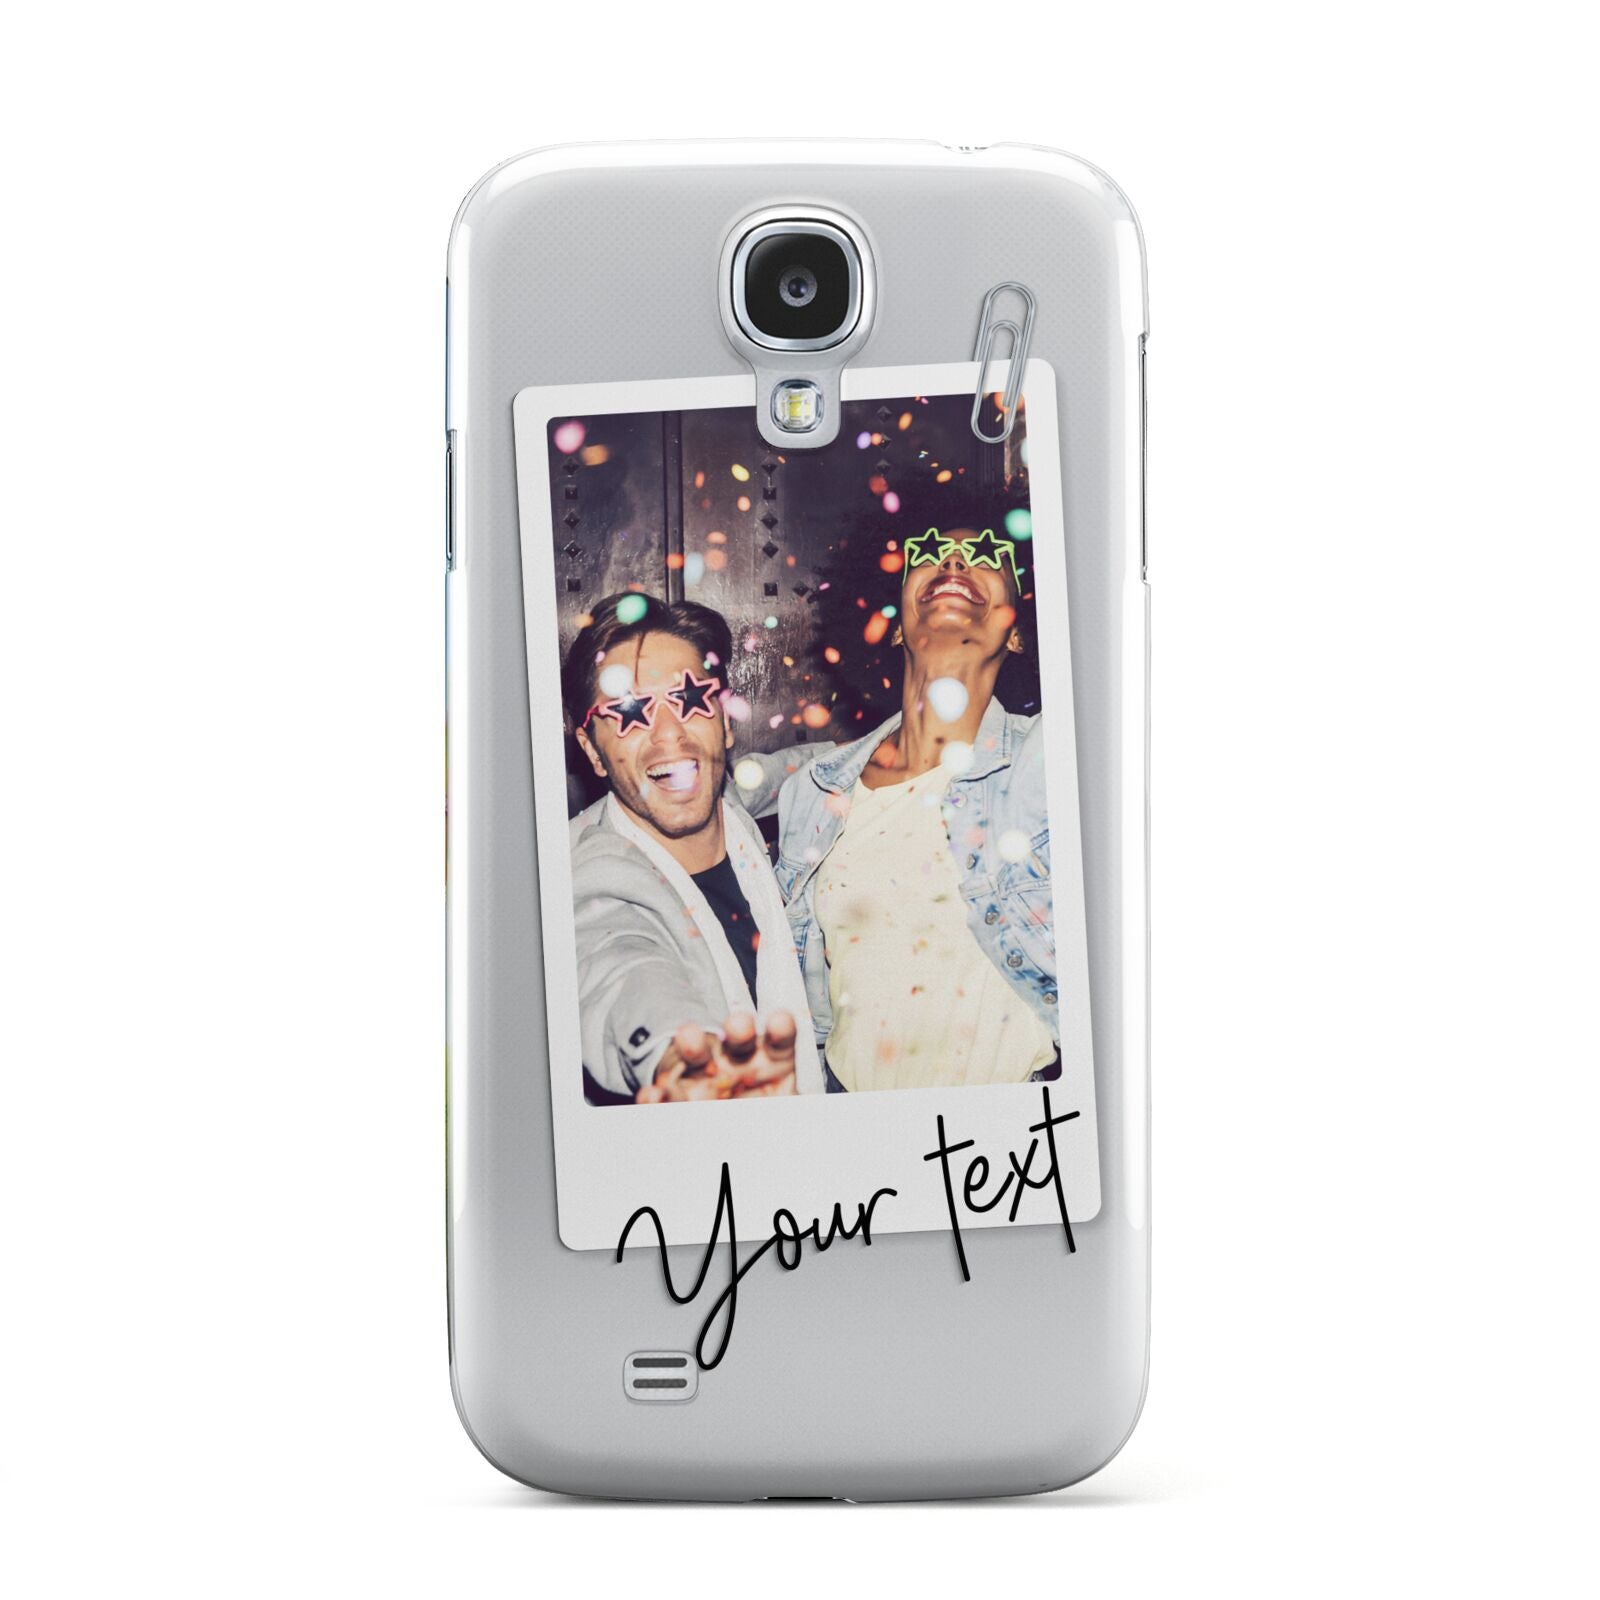 Personalised Photo with Text Samsung Galaxy S4 Case